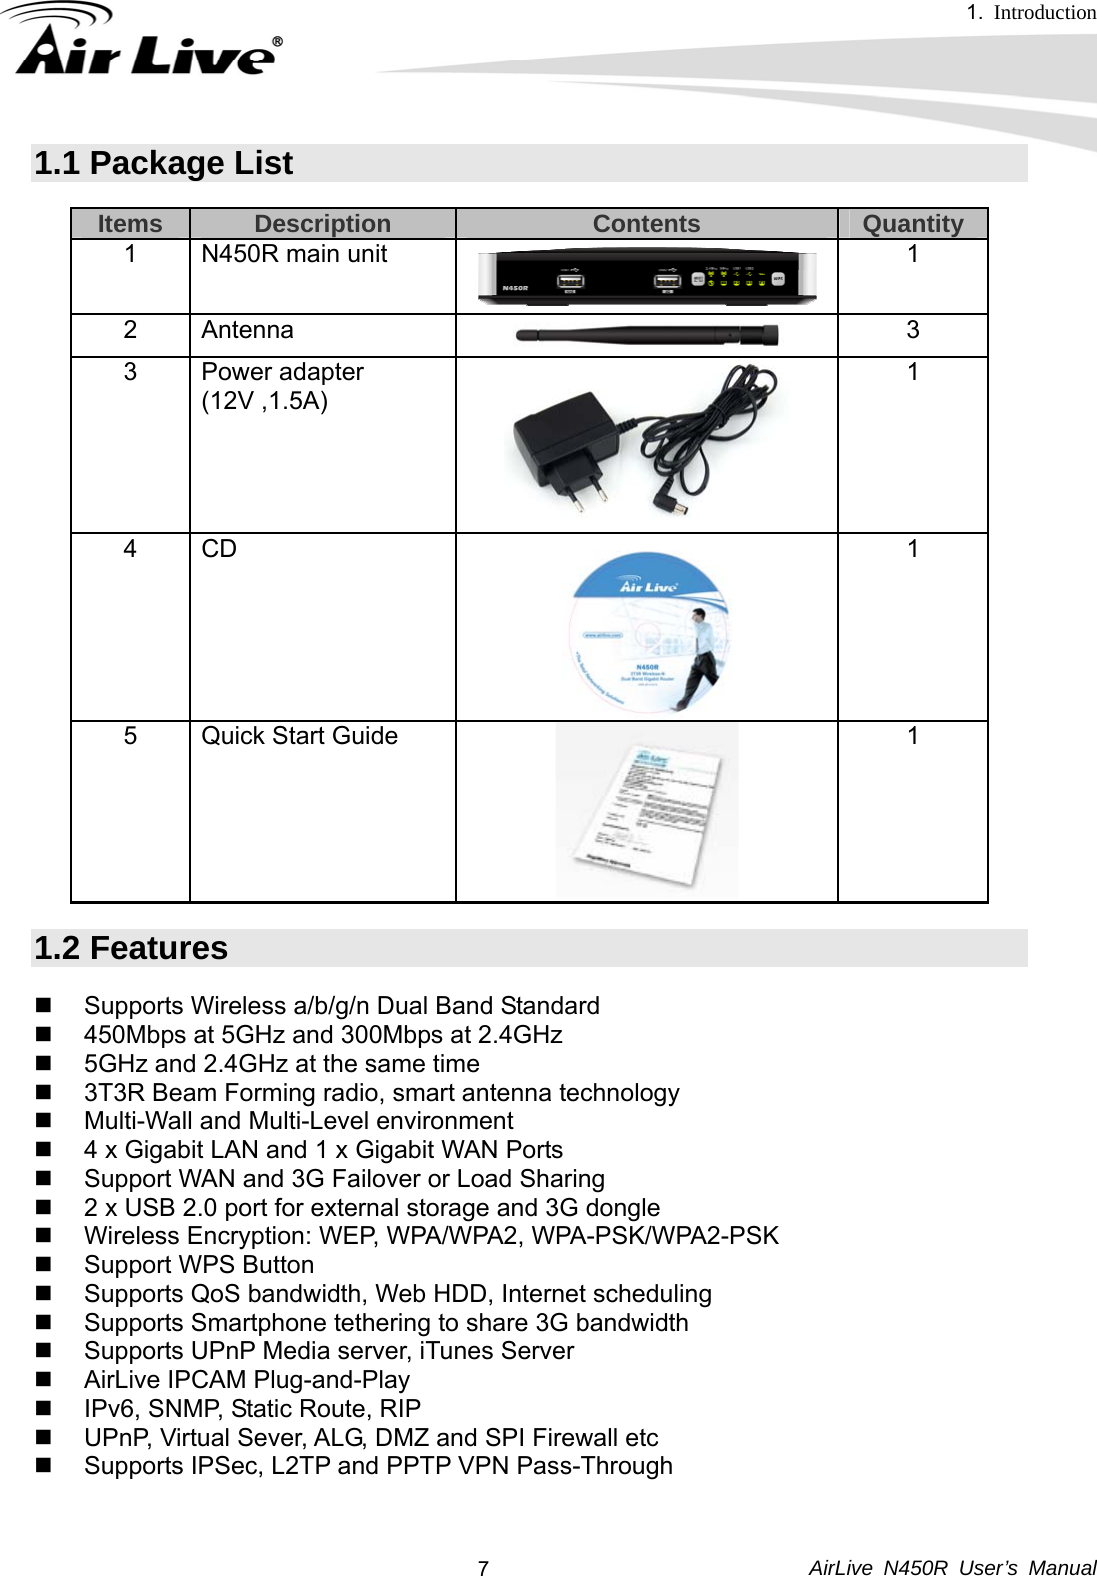 1.  Introduction     AirLive N450R User’s Manual  71.1 Package List Items  Description  Contents  Quantity 1  N450R main unit  1 2 Antenna    3 3 Power adapter  (12V ,1.5A)  1 4 CD     1 5  Quick Start Guide  1 1.2 Features   Supports Wireless a/b/g/n Dual Band Standard   450Mbps at 5GHz and 300Mbps at 2.4GHz   5GHz and 2.4GHz at the same time   3T3R Beam Forming radio, smart antenna technology   Multi-Wall and Multi-Level environment     4 x Gigabit LAN and 1 x Gigabit WAN Ports   Support WAN and 3G Failover or Load Sharing   2 x USB 2.0 port for external storage and 3G dongle   Wireless Encryption: WEP, WPA/WPA2, WPA-PSK/WPA2-PSK  Support WPS Button   Supports QoS bandwidth, Web HDD, Internet scheduling     Supports Smartphone tethering to share 3G bandwidth   Supports UPnP Media server, iTunes Server   AirLive IPCAM Plug-and-Play   IPv6, SNMP, Static Route, RIP   UPnP, Virtual Sever, ALG, DMZ and SPI Firewall etc   Supports IPSec, L2TP and PPTP VPN Pass-Through 